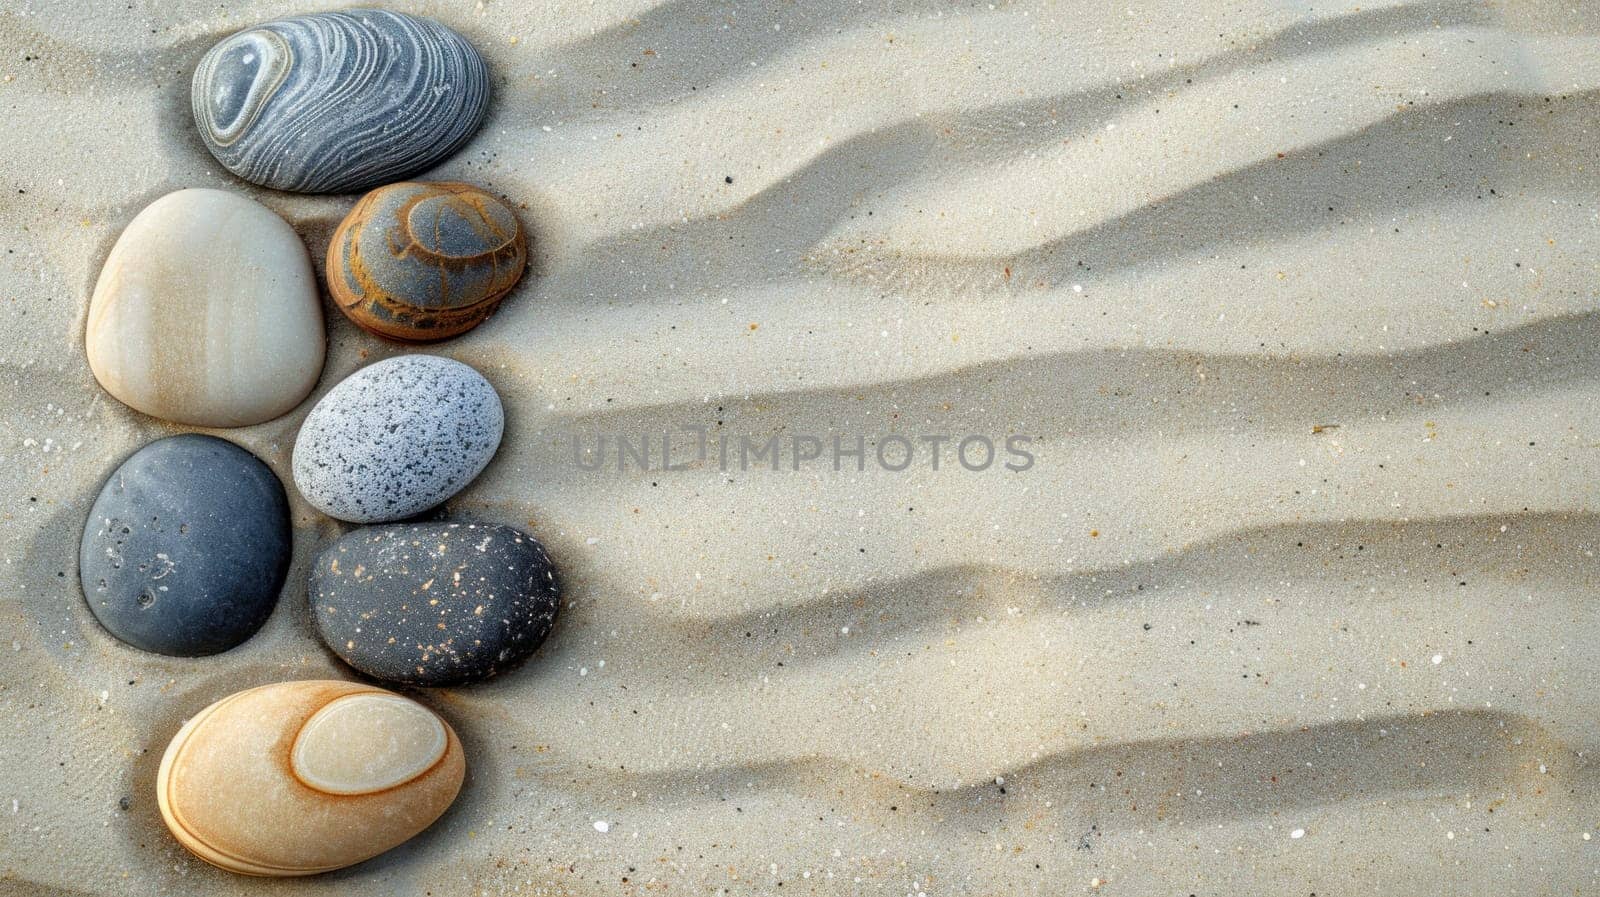 A row of white and brown rocks on a sandy beach.